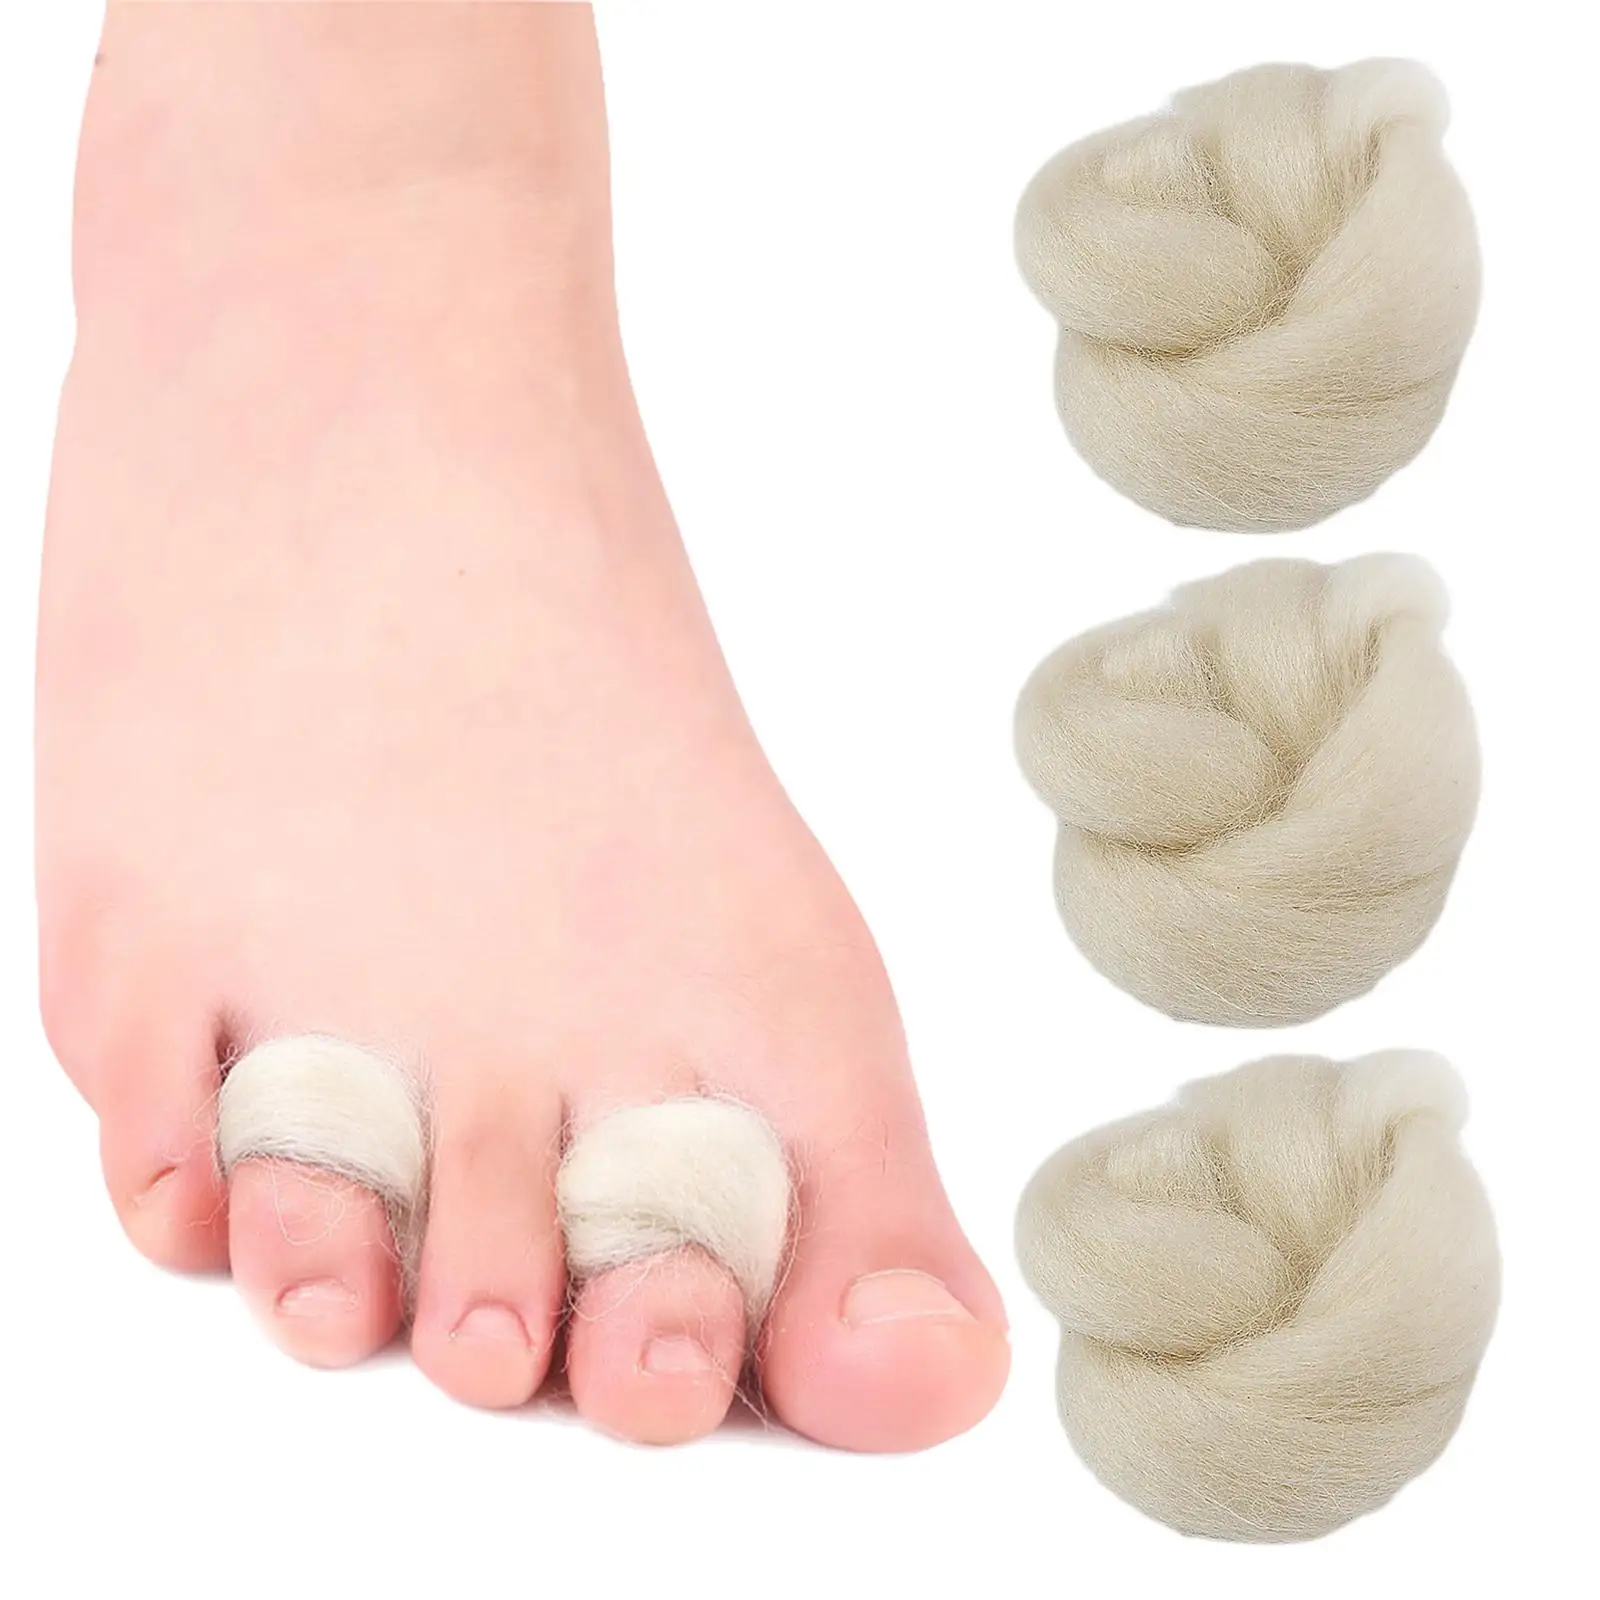 3 Count Cushioning Toe Separator Accessories Minimize Blister High Performance Breathable 